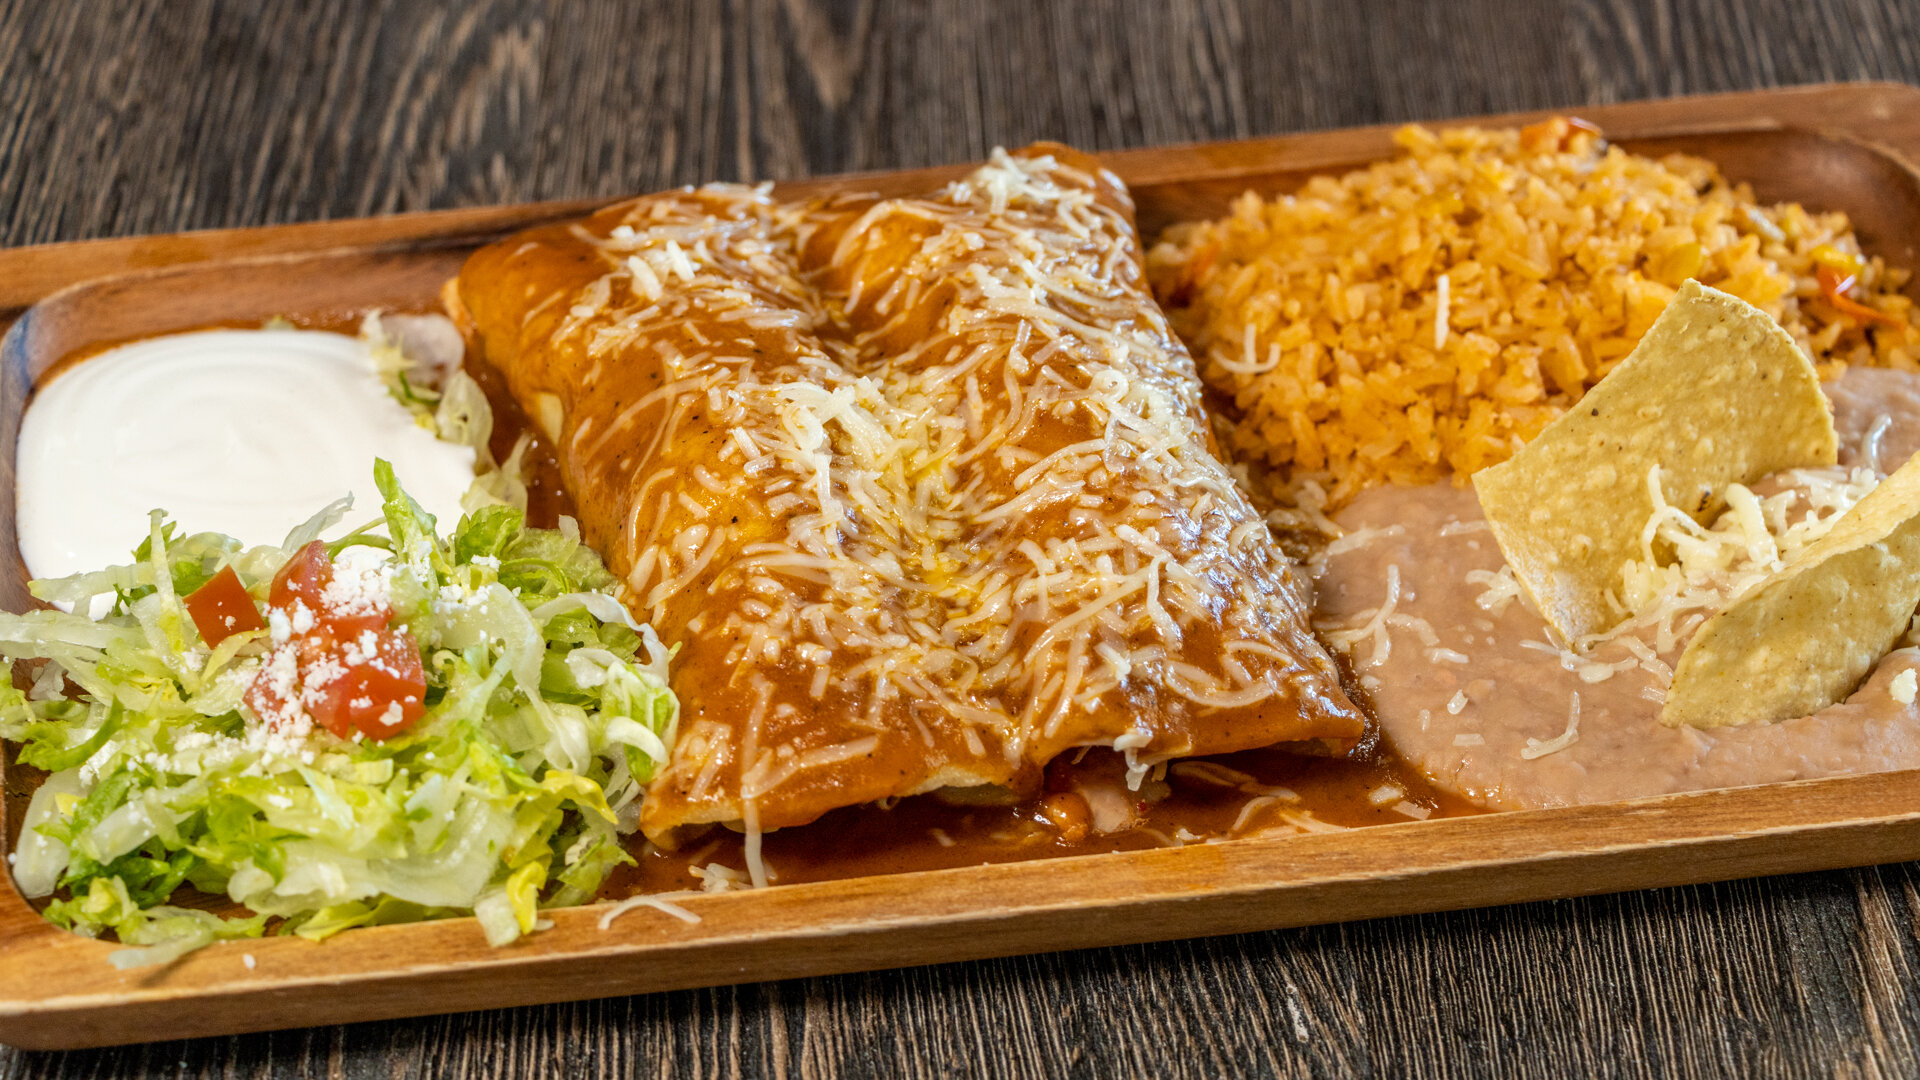 Who's hungry for tacos? 🌮🌯🥗😋 Be sure to stop by #senortaco in Chandler and get your grub on! Pick your favorite! 👉 1-8 

#food #foodie #instafood #tacos #carneasada #enchiladas #foodphotography #foodstagram #foodblogger #yummy #foodlover #delici